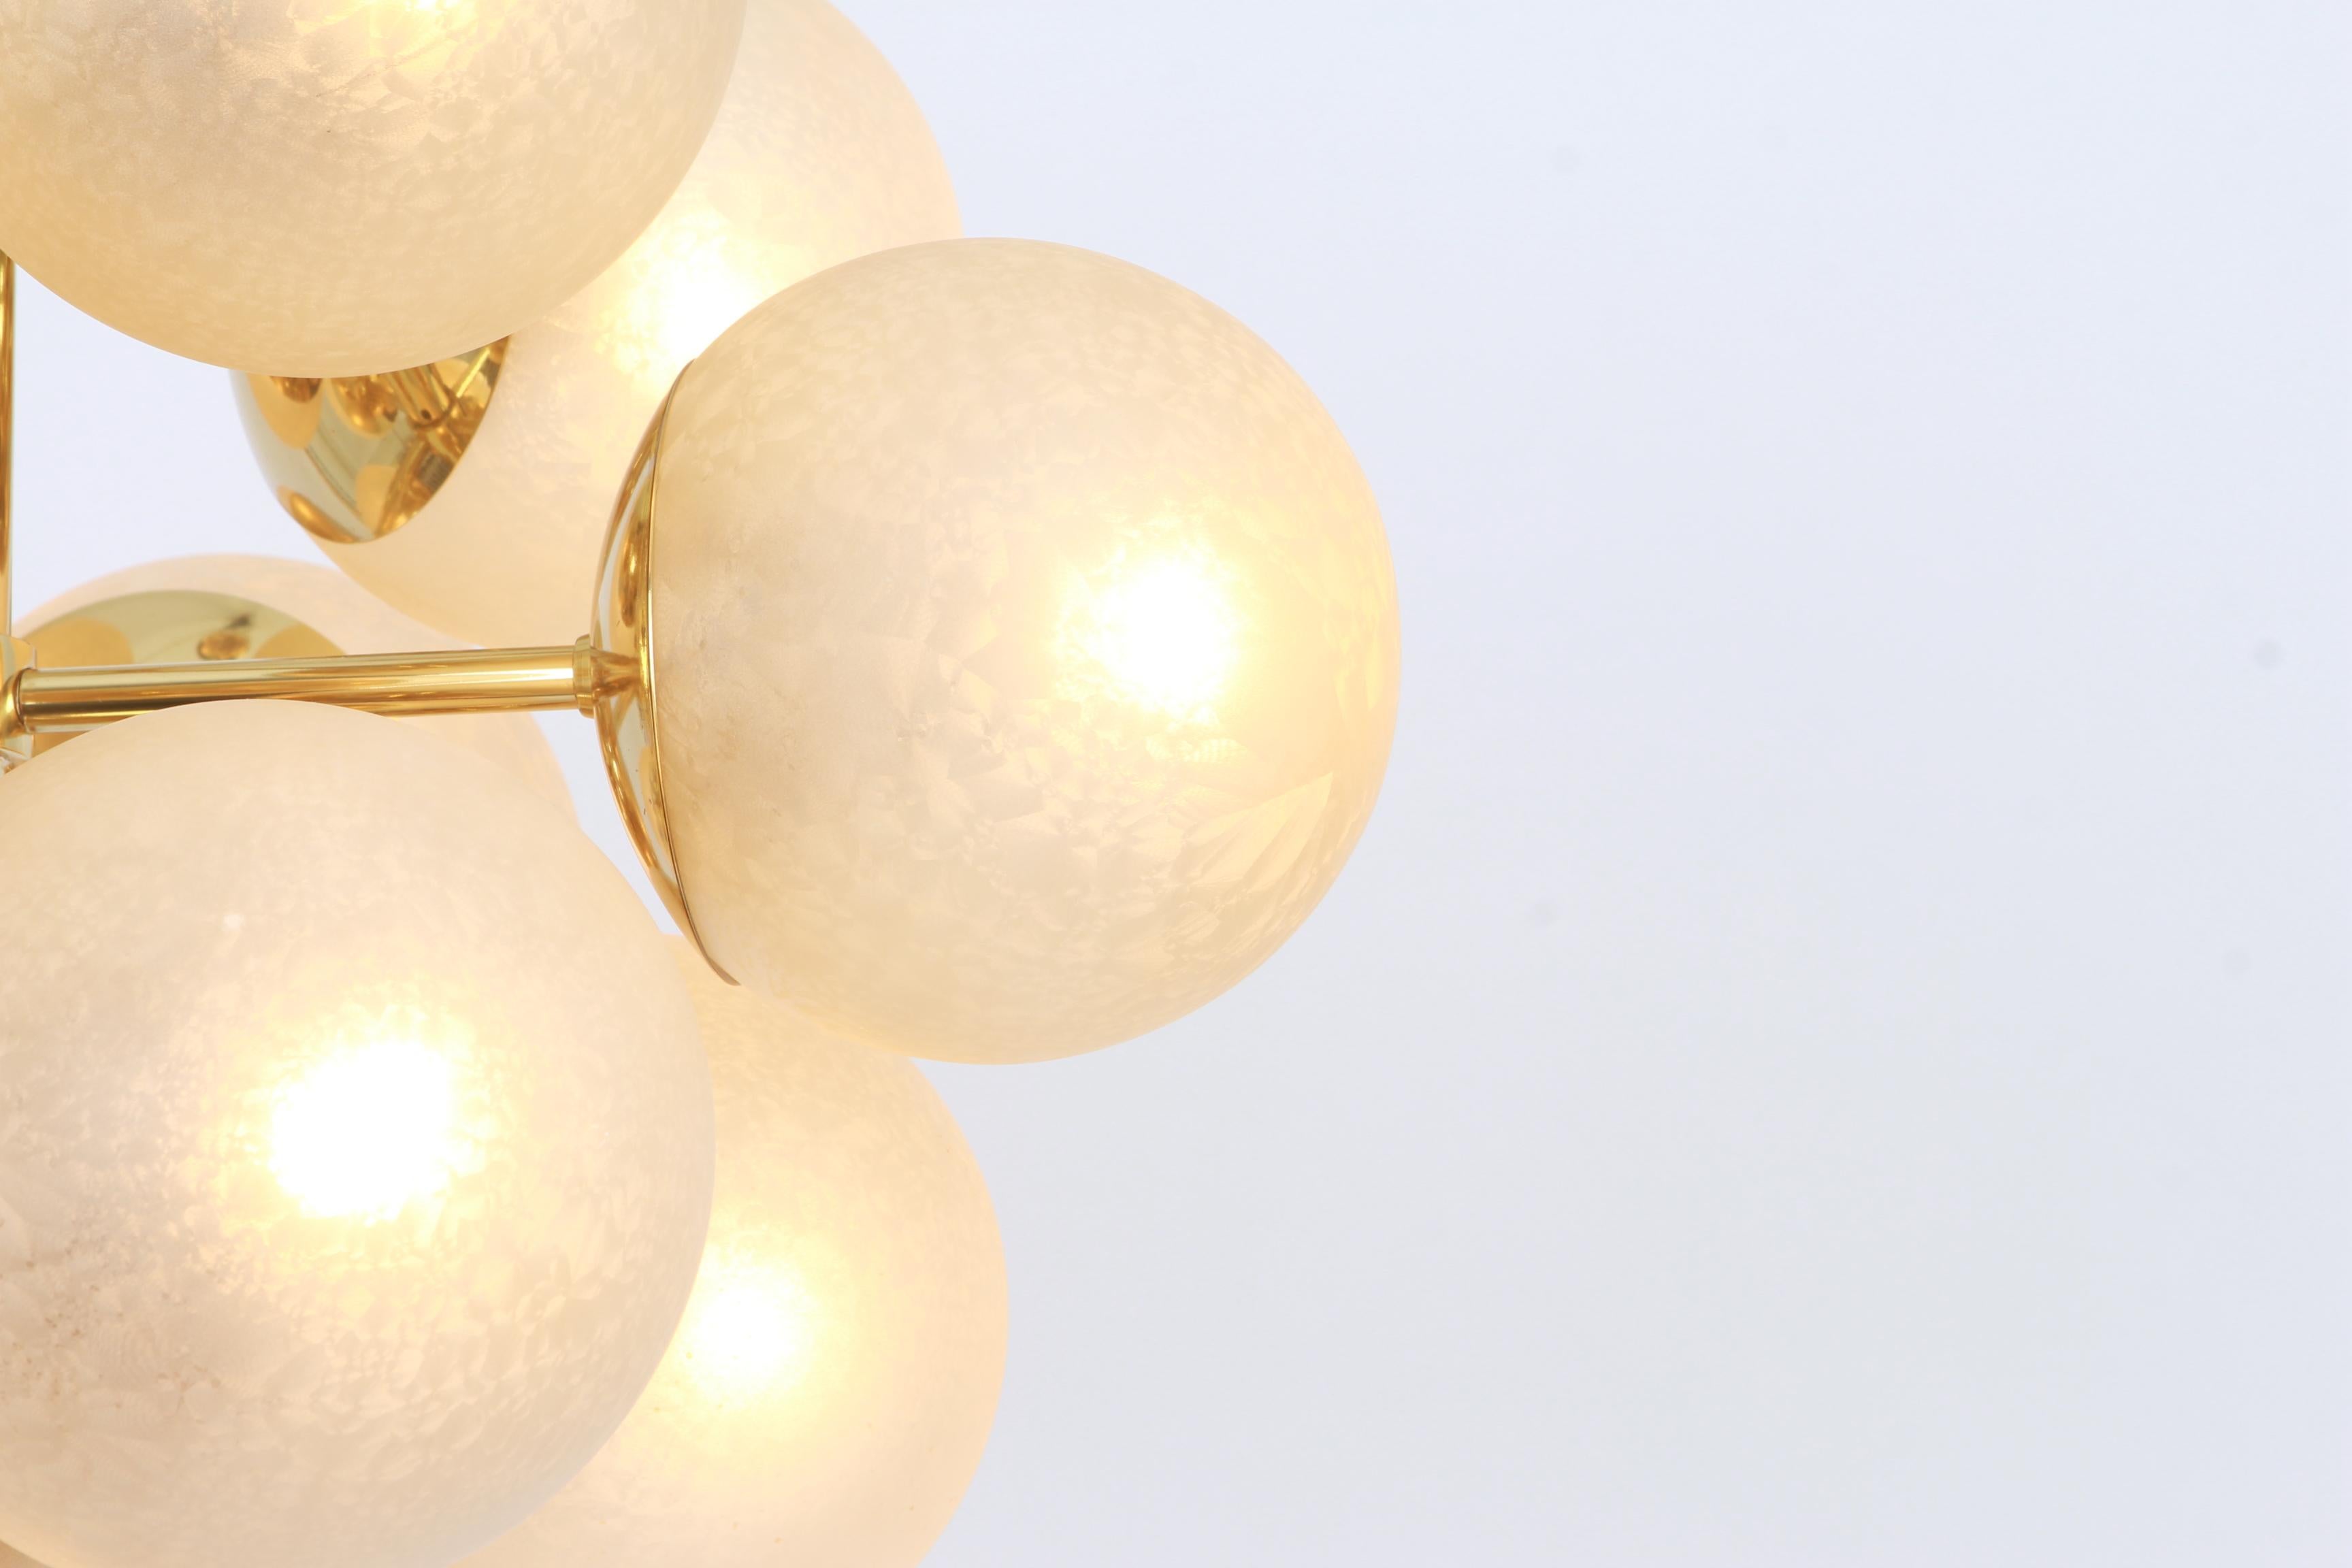 Stunning Sputnik brass chandelier with 13 handmade glass globes by Kaiser Leuchten, Germany, 1960s.

High quality and in very good condition. Cleaned, well-wired and ready to use. 

The fixture requires 13 x E14 small bulbs with 40W max each and